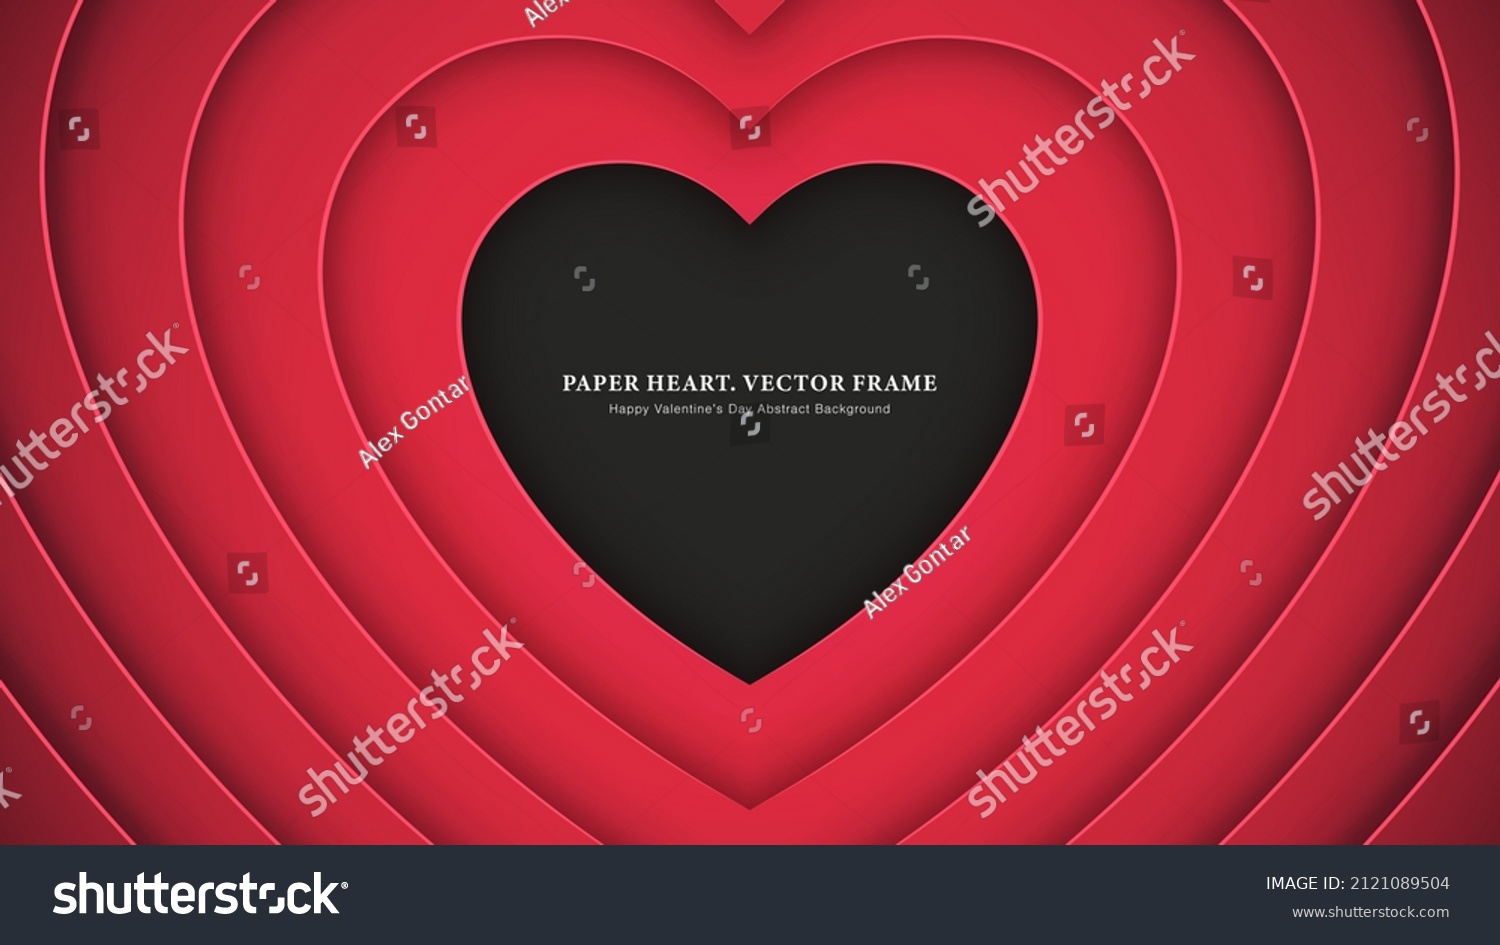 Crimson Papercut Layered Paper Heart Frame Happy Valentine's Day Background. 3D Cutout Cardboard Decorative Red Heart Shapes Love Symbol Romantic Art Wallpaper. Valentines Day Heart Border #2121089504